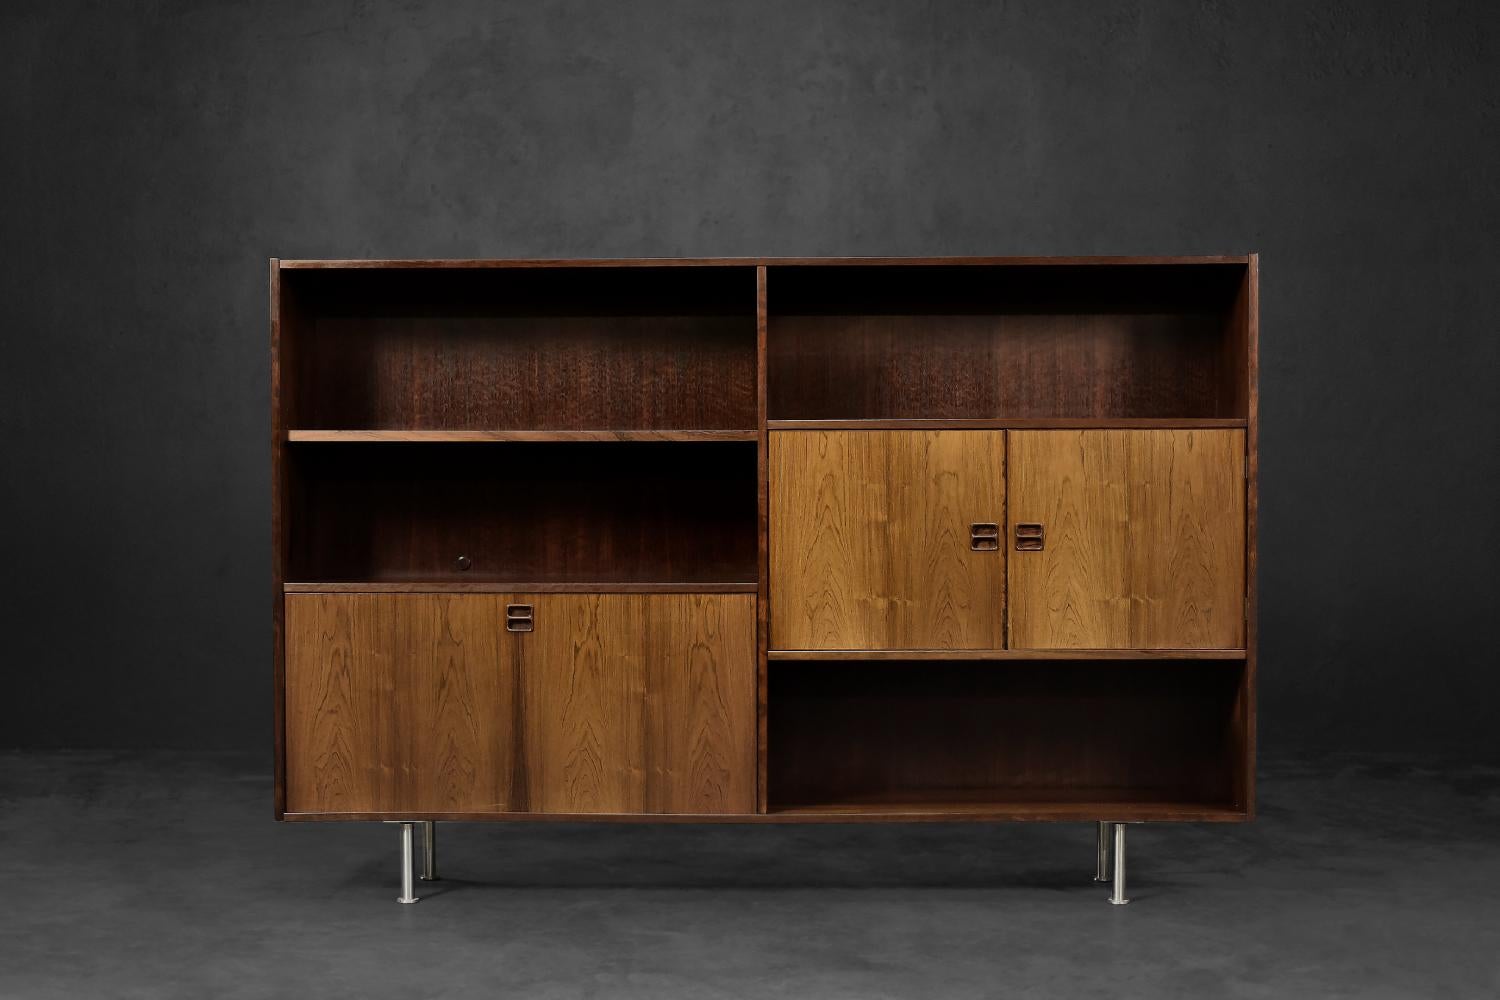 This large cabinet was designed by Ærthøj Jensen and Tage Mølholm for the Danish Herning factory during the 1960s. It is made of noble rosewood. The dark color of the wood contrasts perfectly with the lighter door elements. The piece of furniture